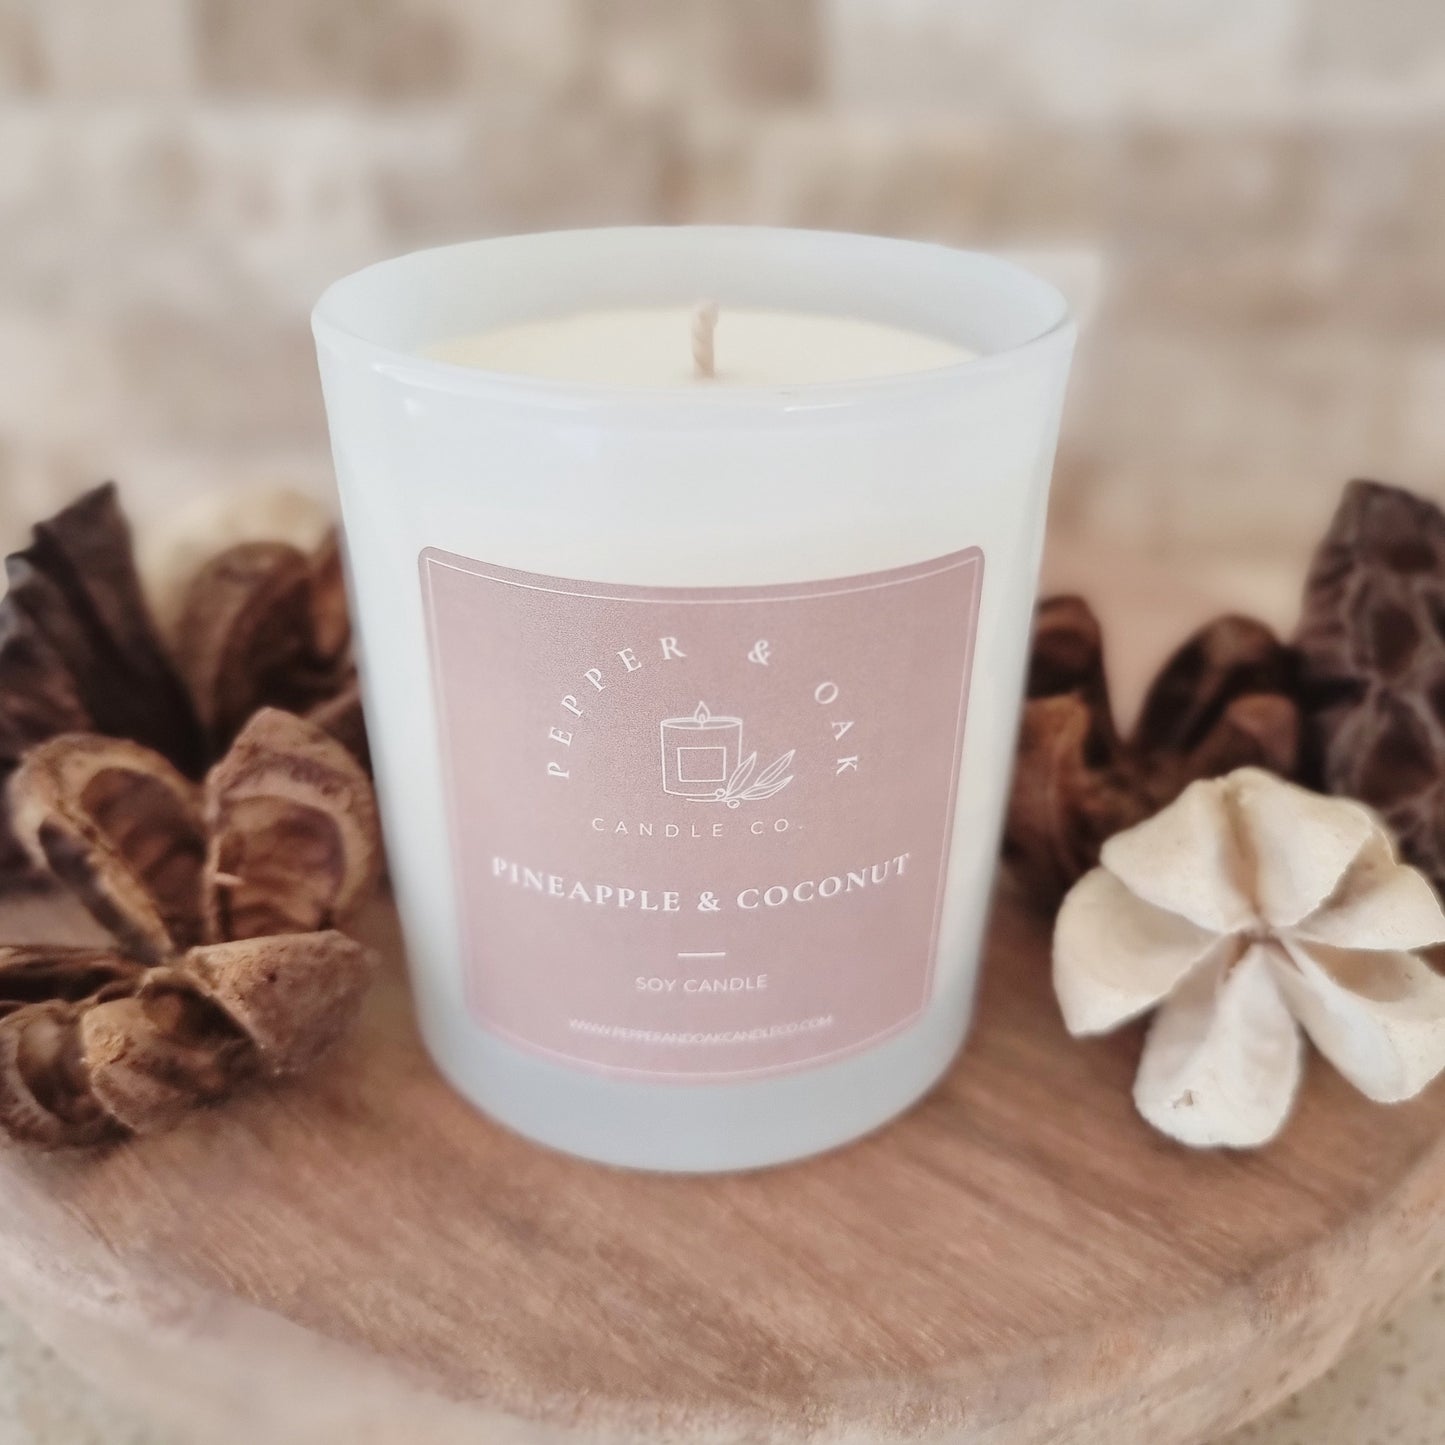 Pineapple & Coconut Soy Candle